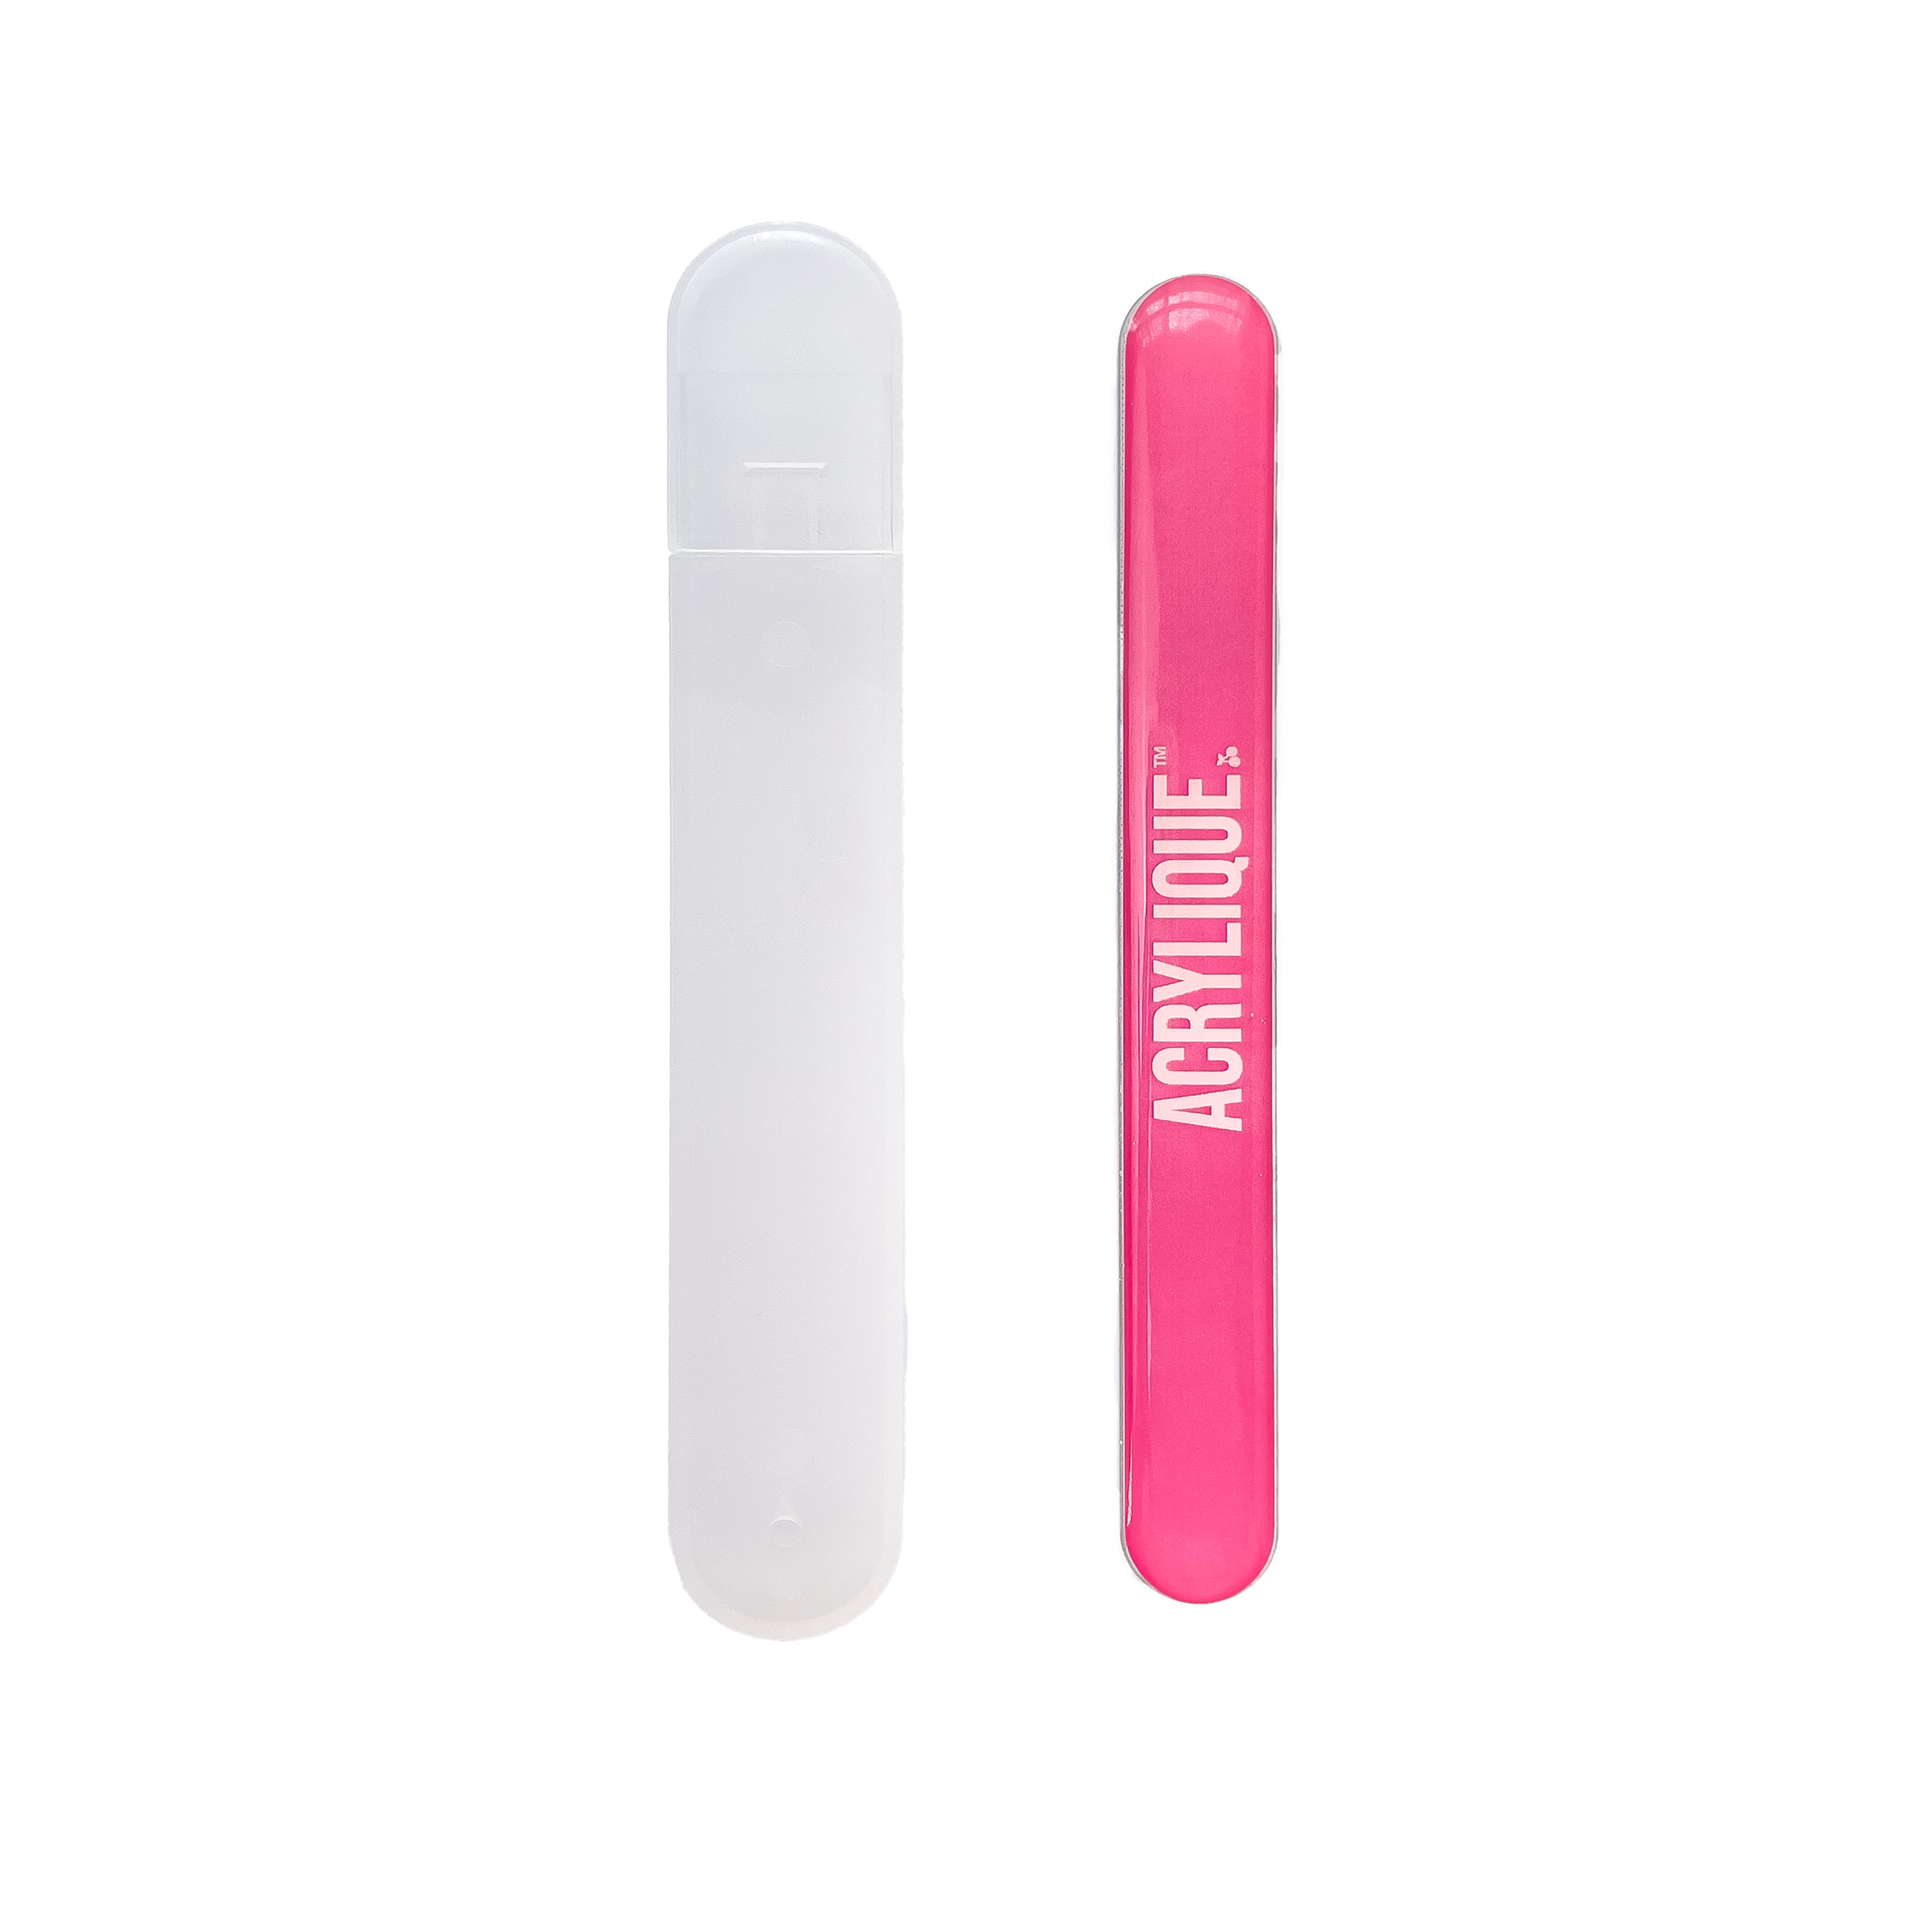 GlowFile™ Triple Parked (3 Pack)